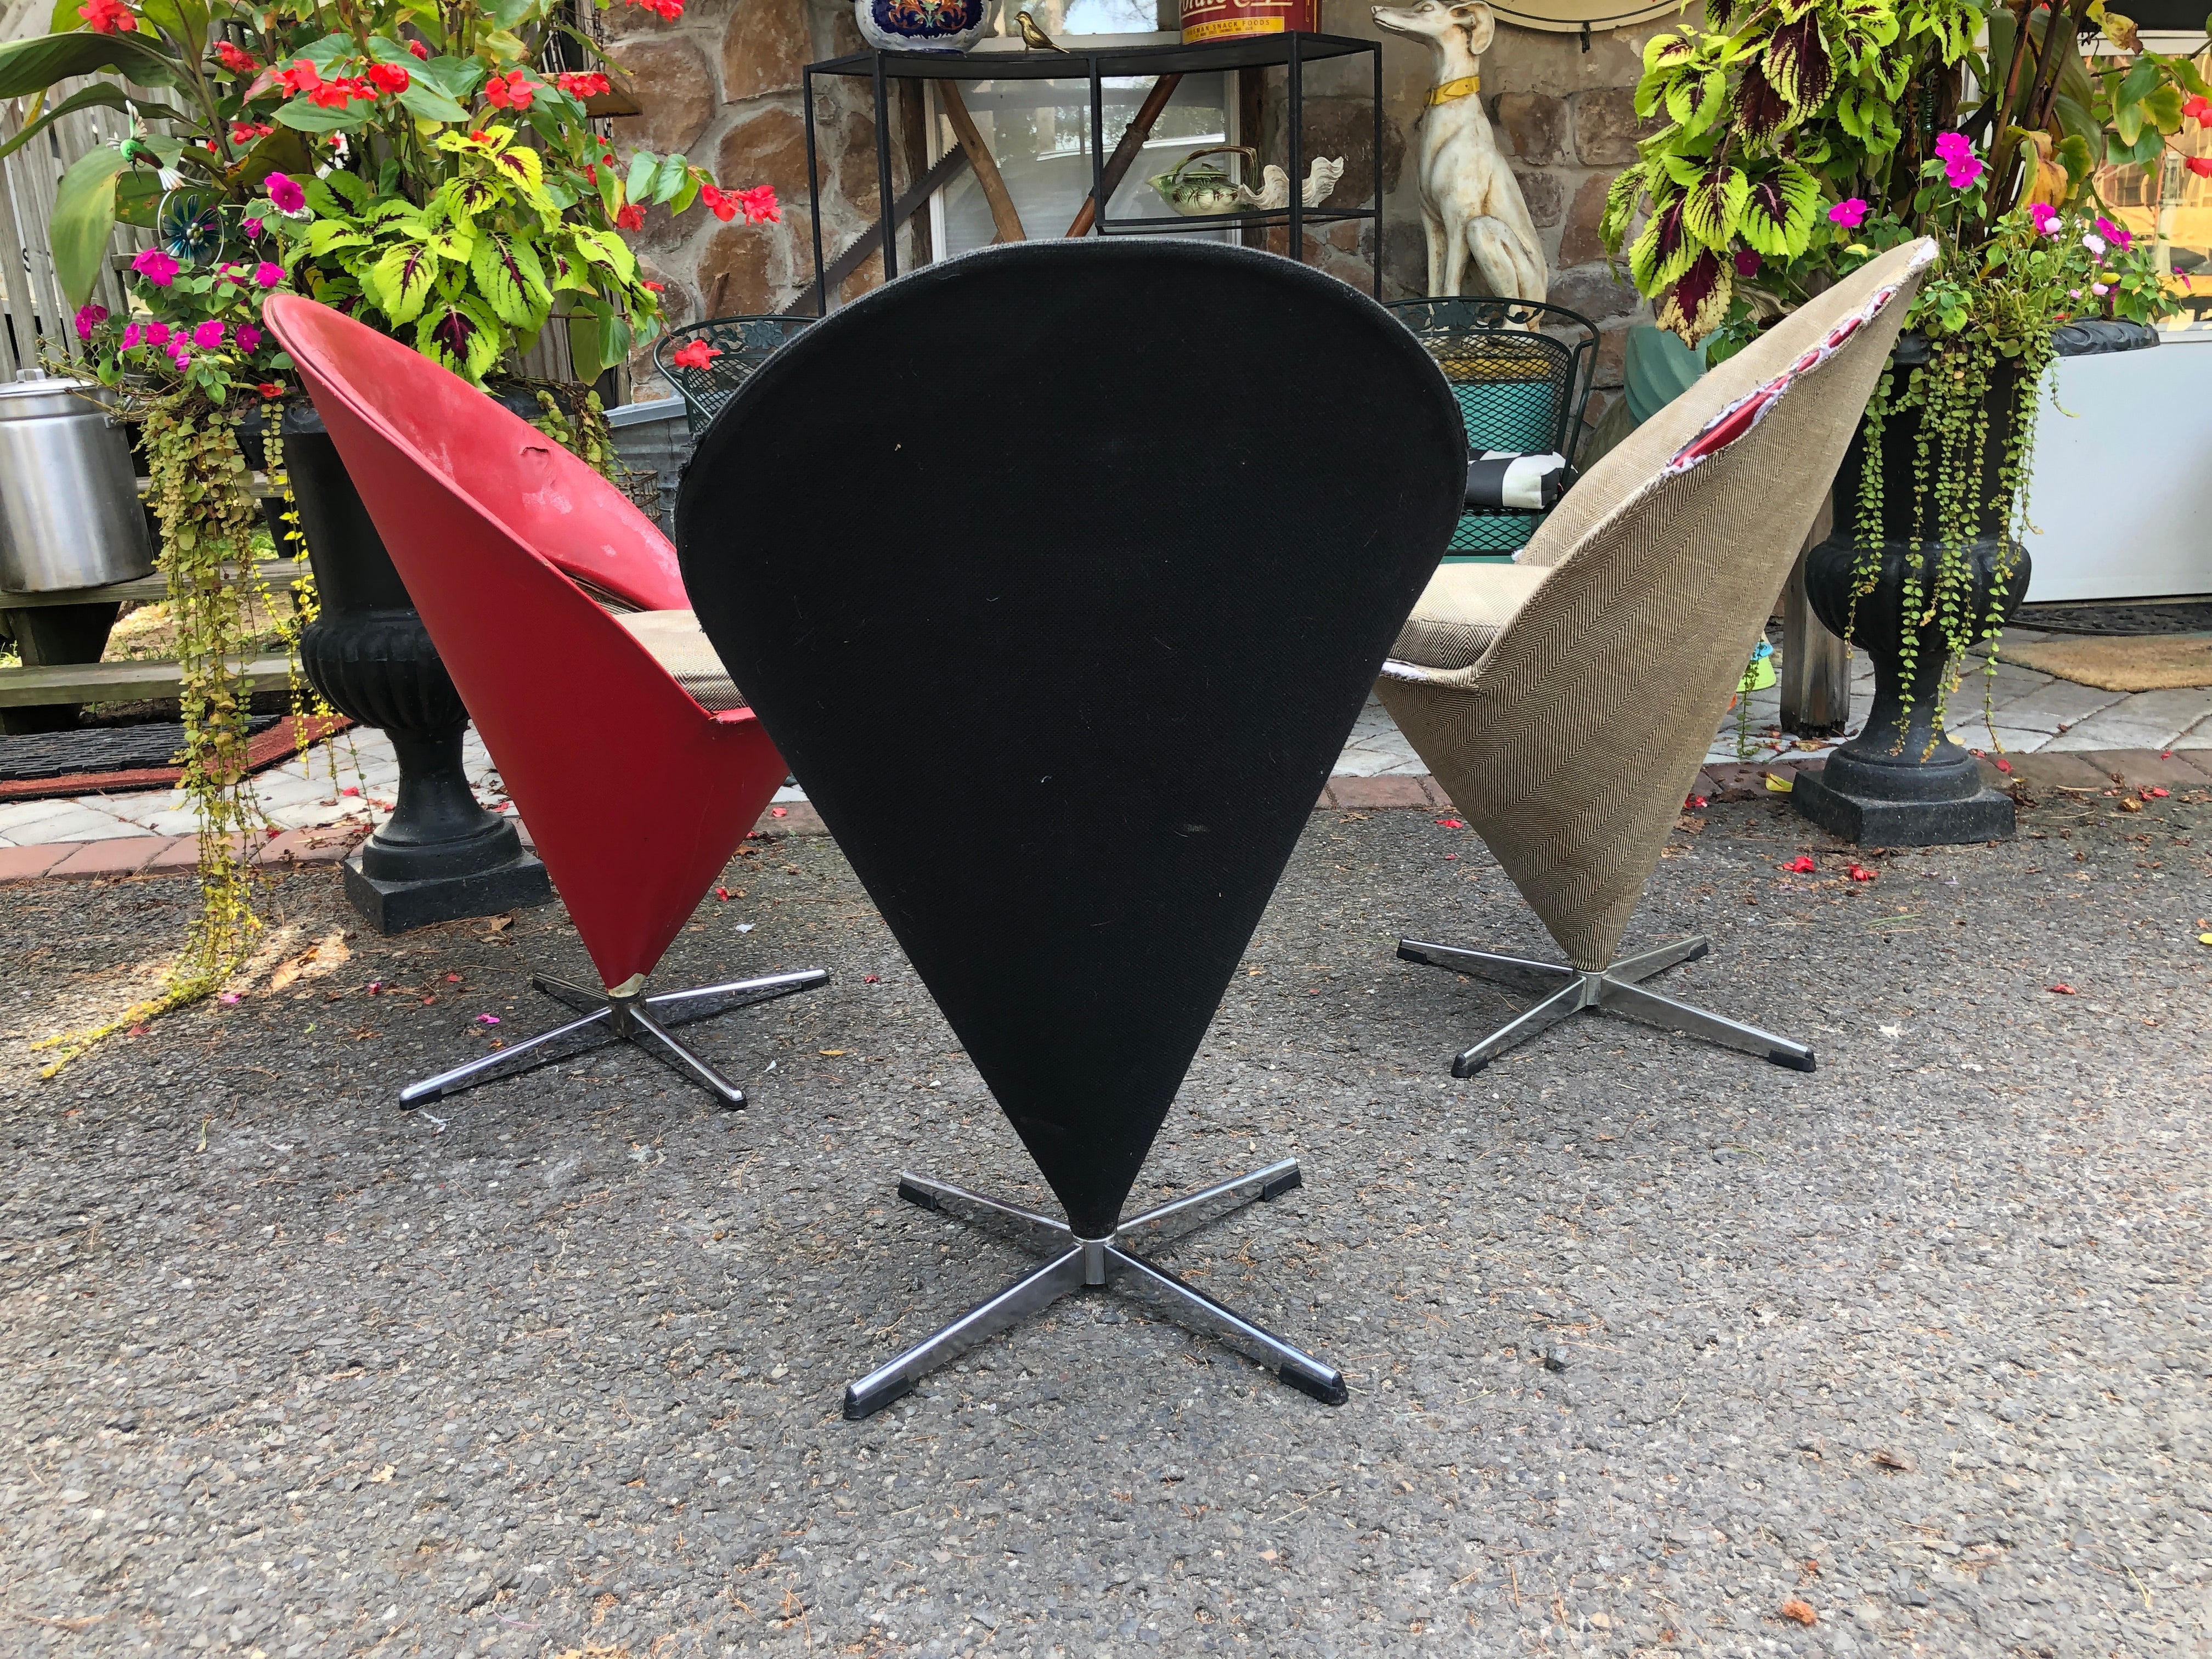 Set of 3 original sixties production Panton cone chairs with original fabric in fair condition.  Iconic chairs, comfortable as side chair or dining chair. Out of this world!  designed in 1958 by Verner Panton, one of Denmark's most influential